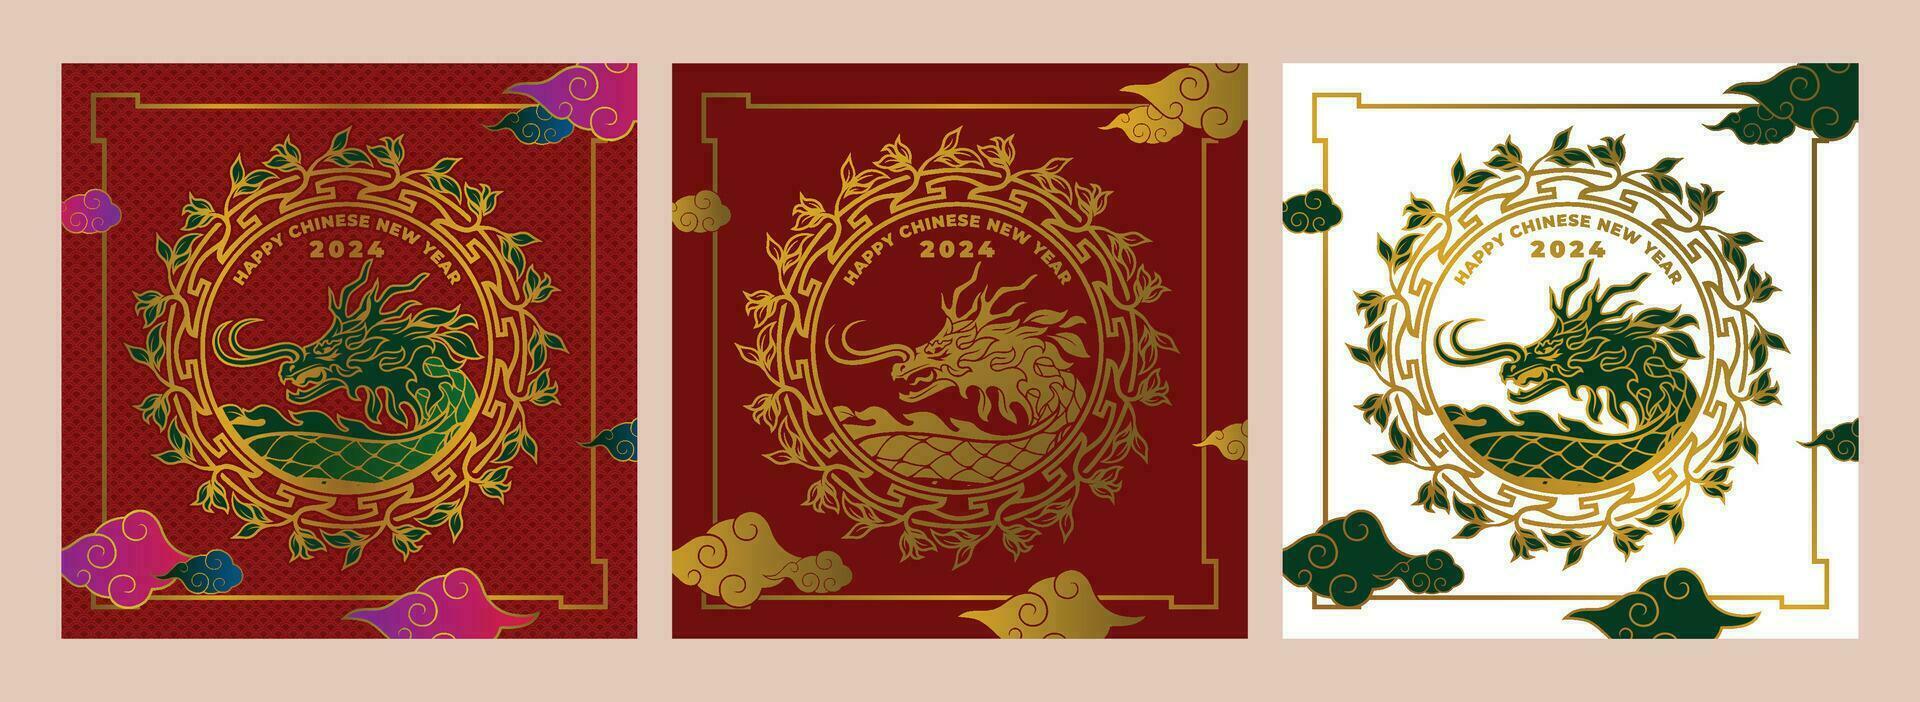 CHINESE NEW YEAR 2024 SQUARE vector